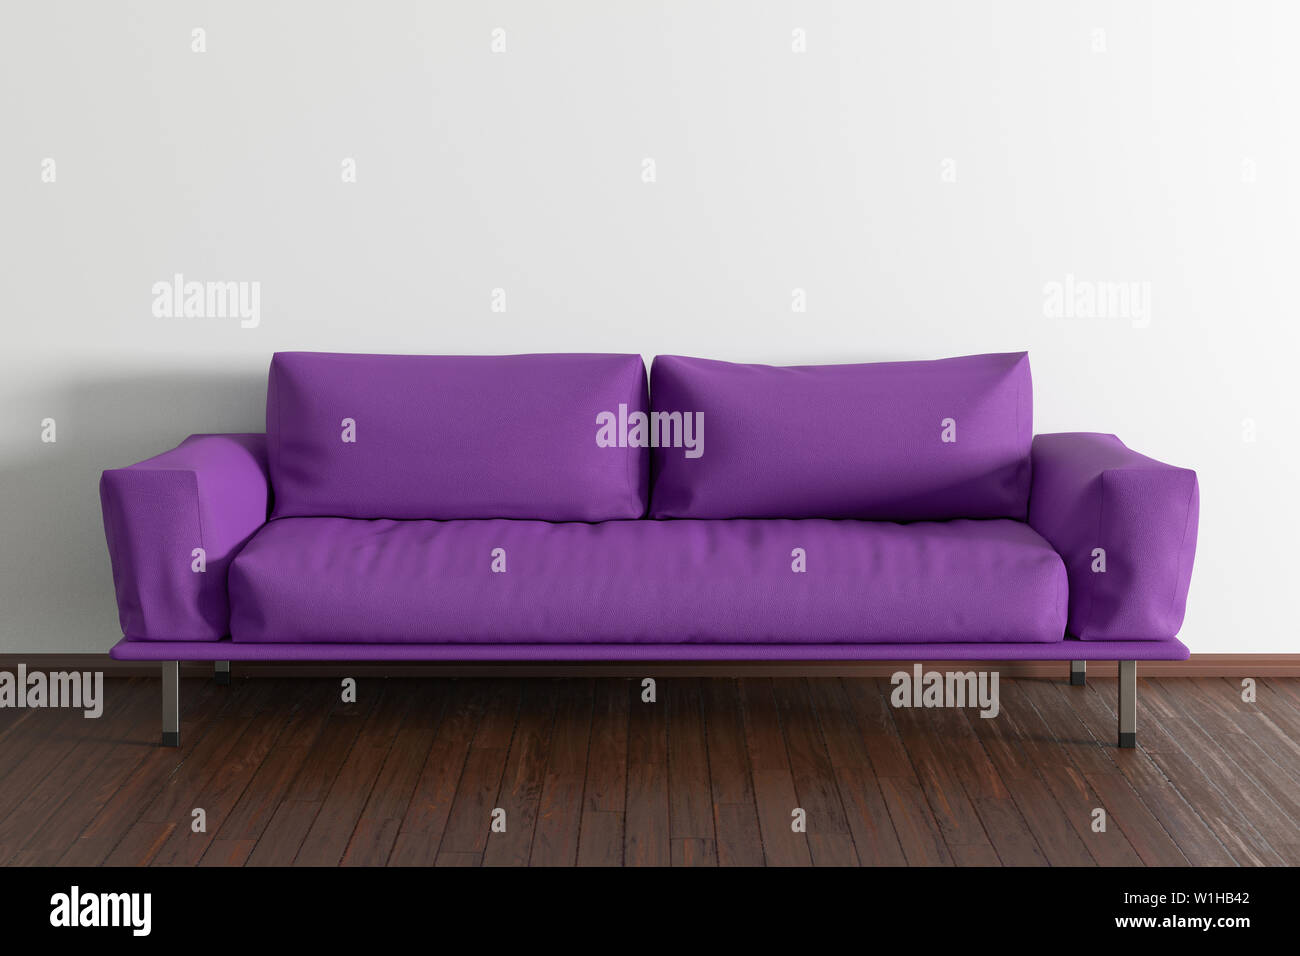 Fuchsia leather couch in interior of living room with wooden flooring and white wall. 3d illustration Stock Photo